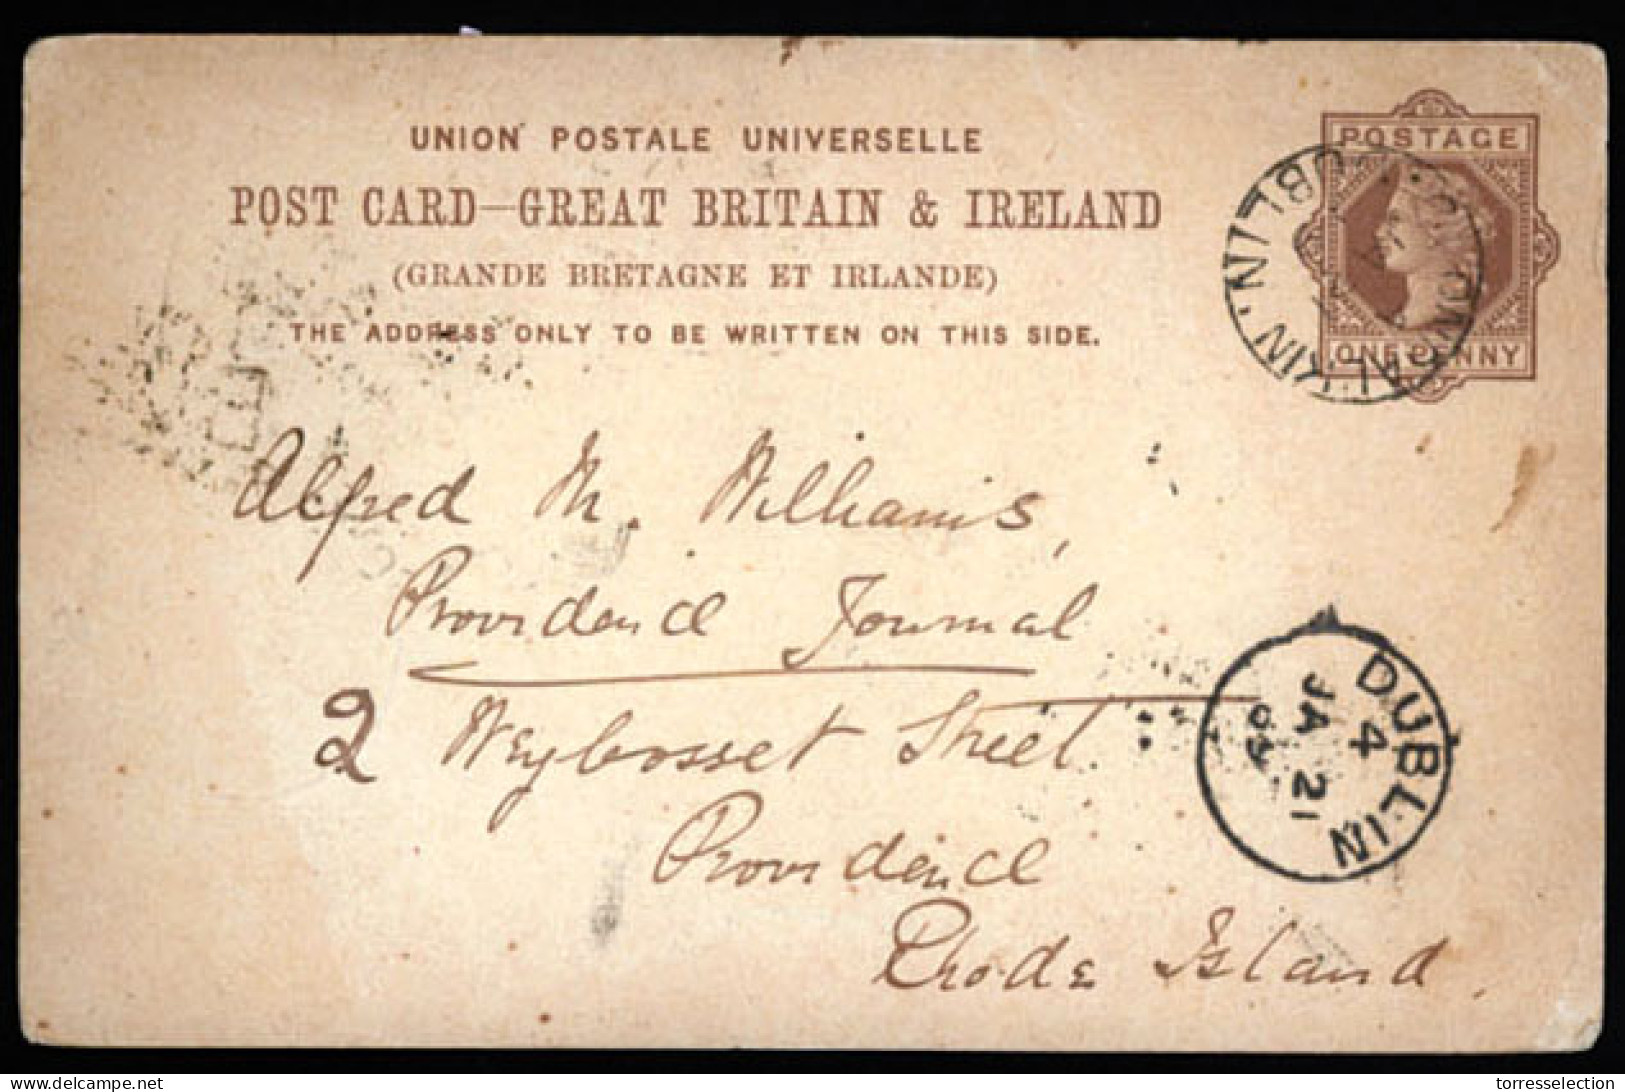 EIRE. 1889. Stationery Card. C.Ondalkin/Dublin To USA. Very Nice. - Used Stamps